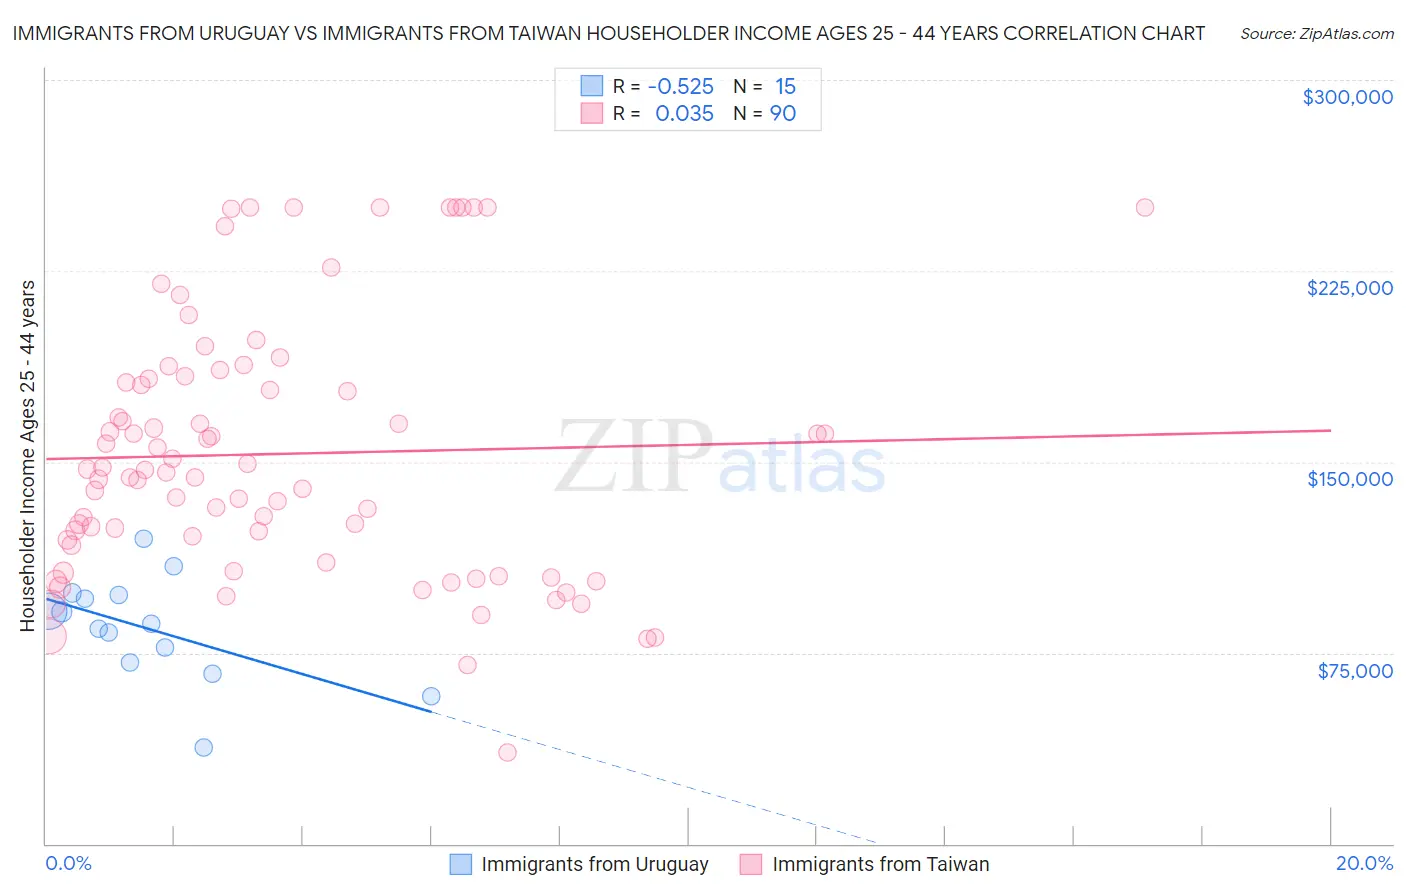 Immigrants from Uruguay vs Immigrants from Taiwan Householder Income Ages 25 - 44 years